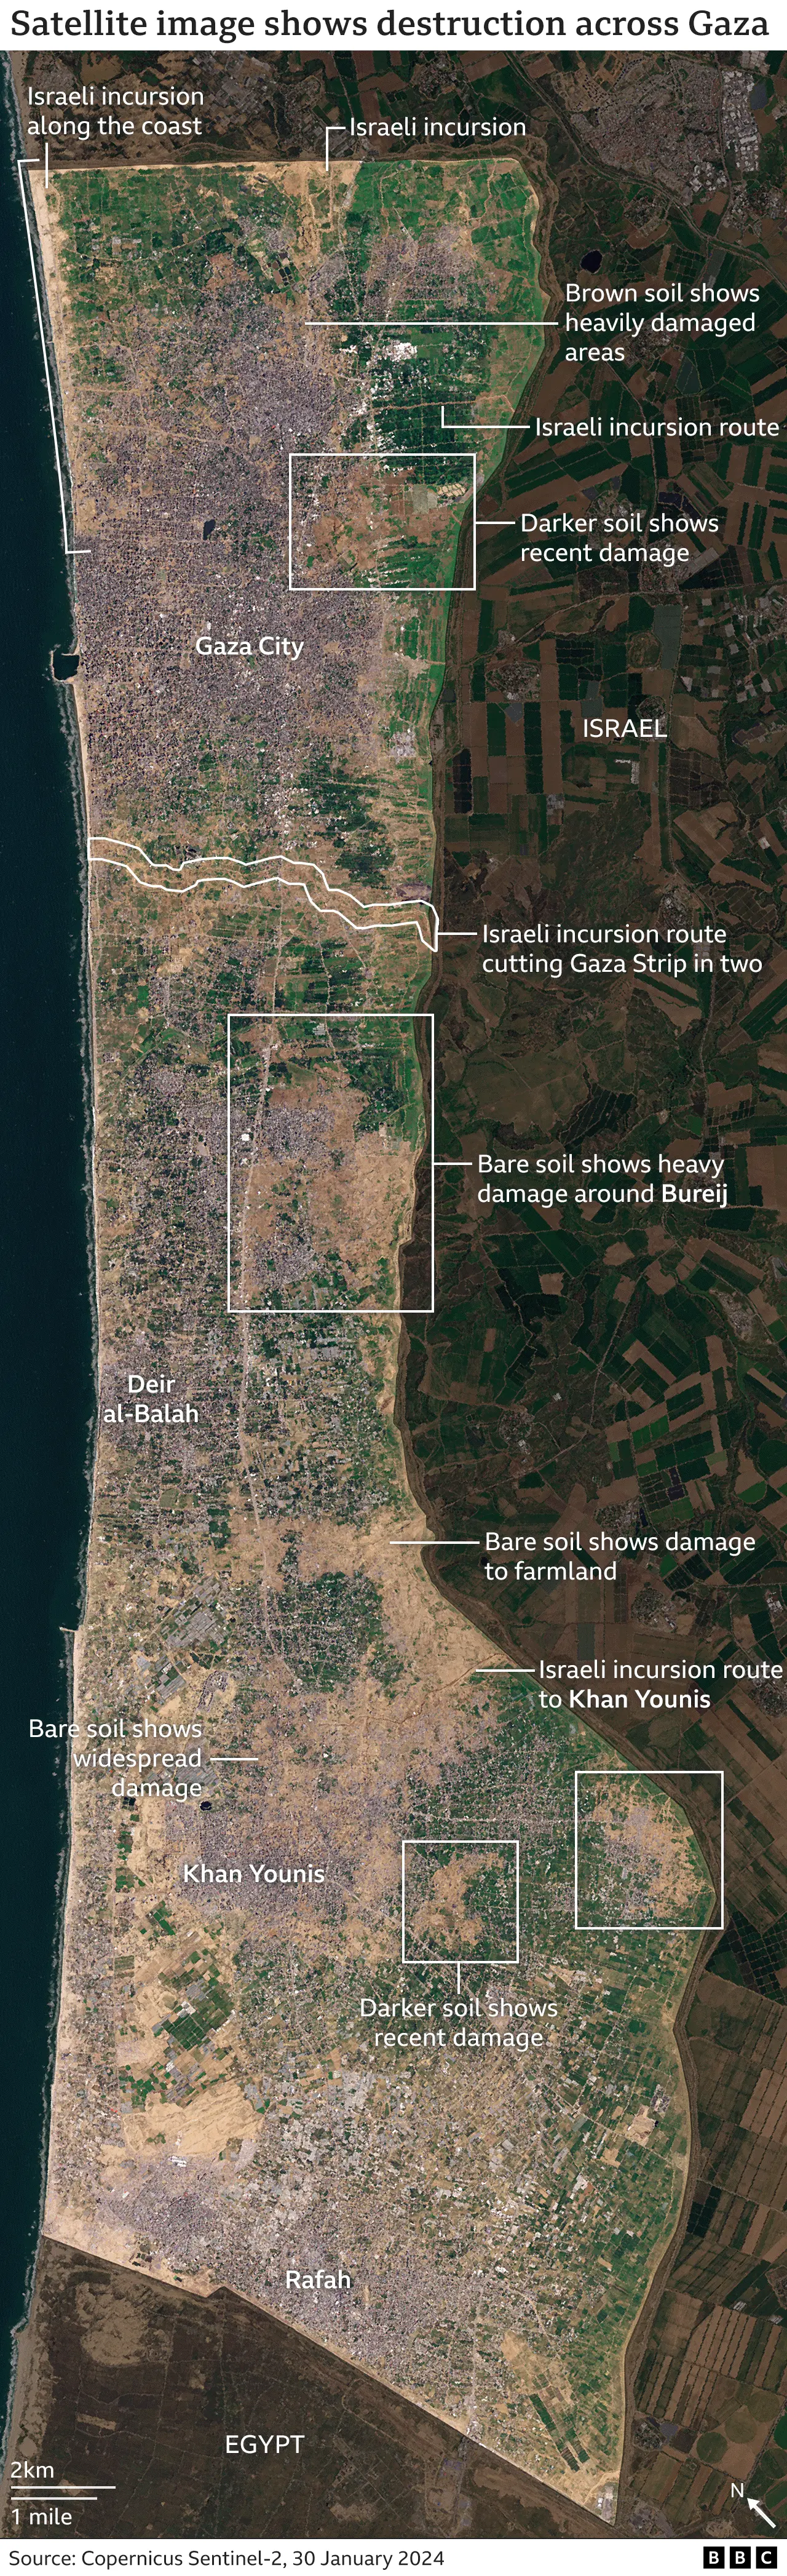 A map showing various sites of destruction across Gaza - you can see dark soil from recent damage, large areas of ruined farm land and sites of Israeli incursions